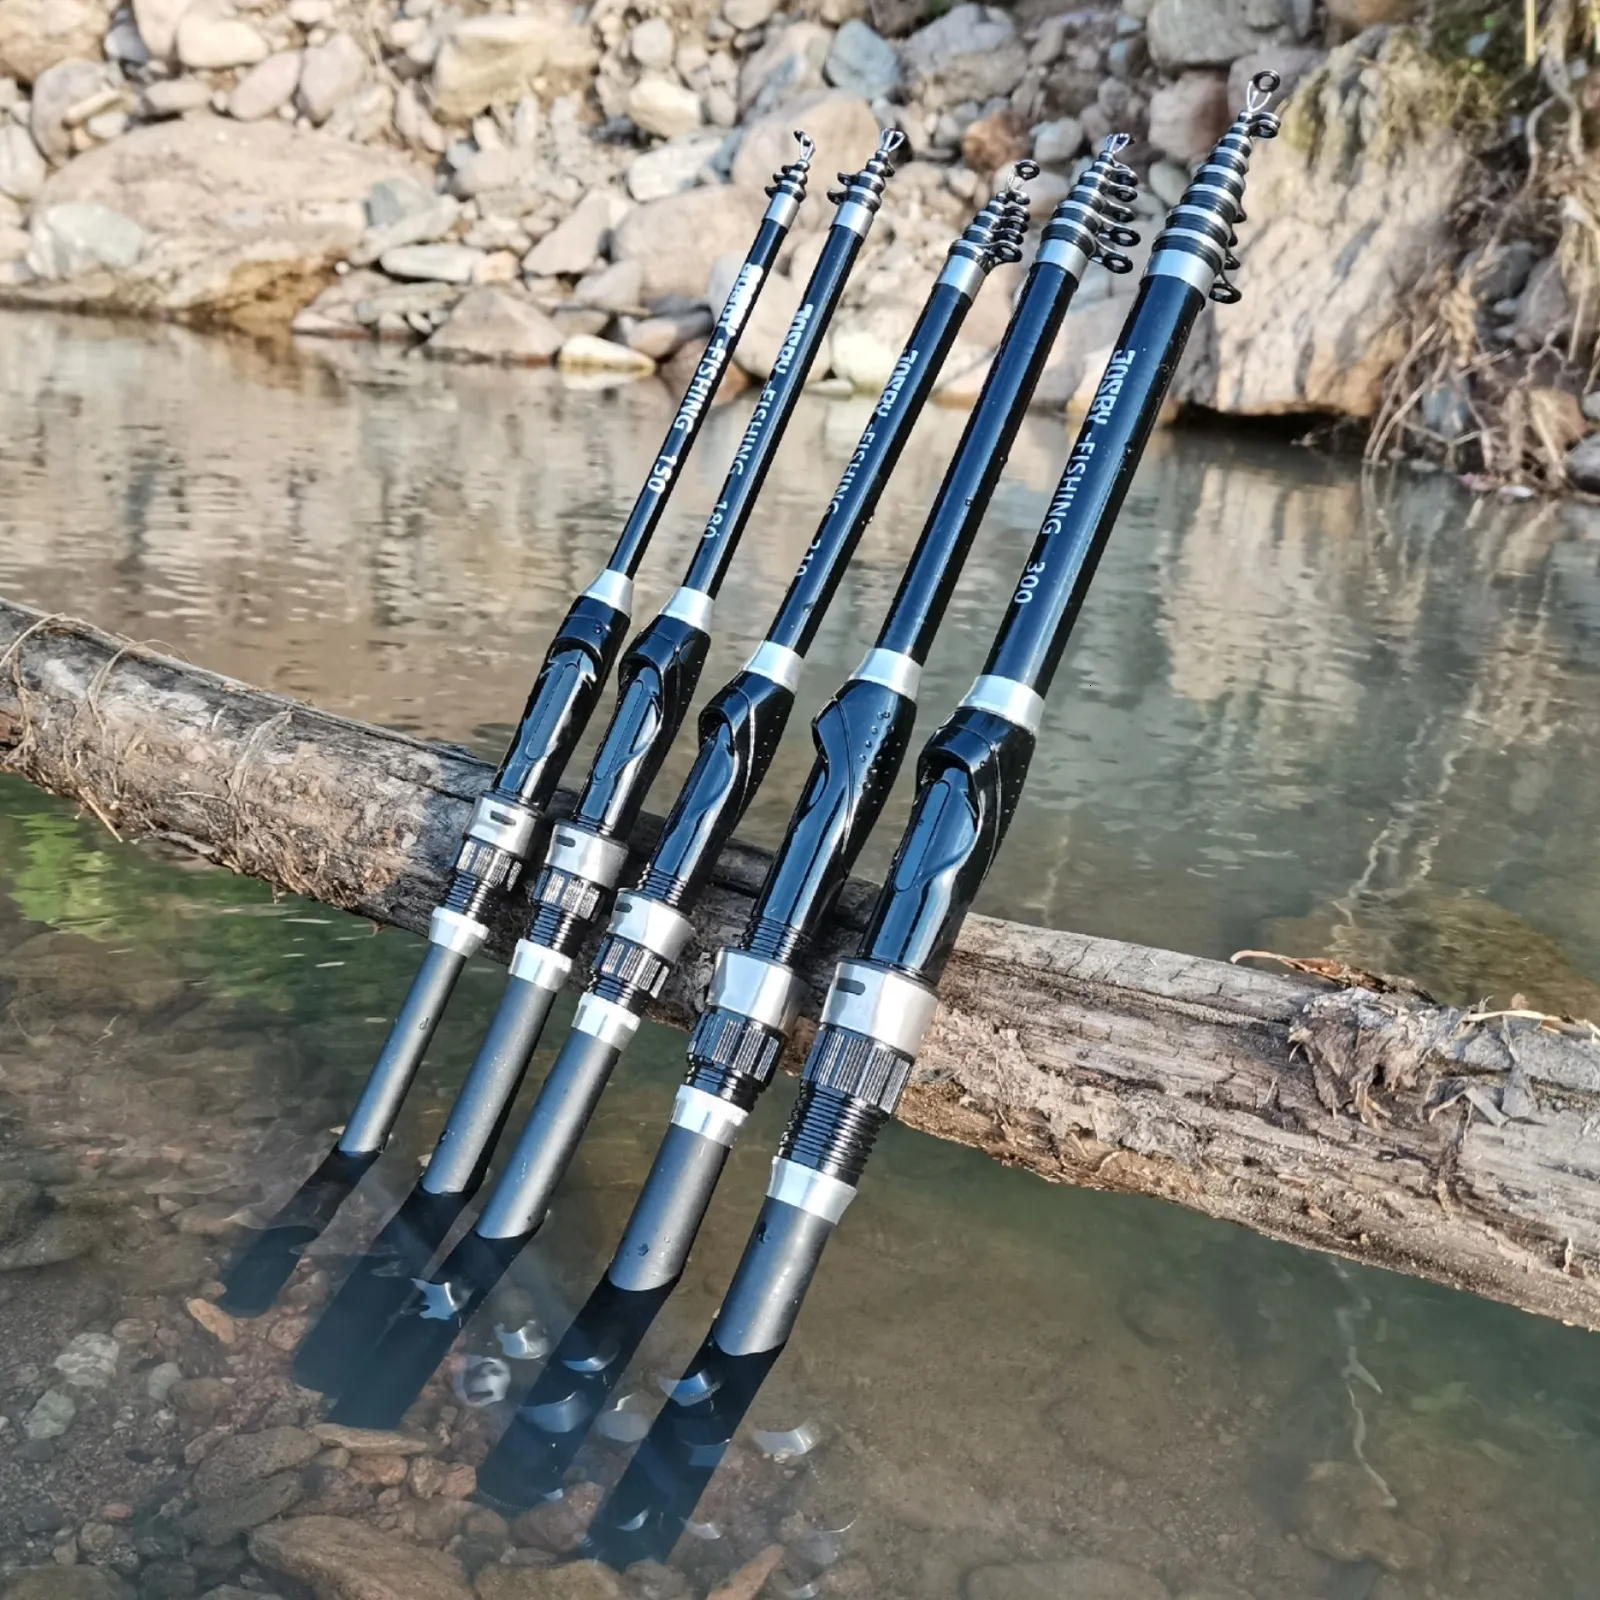 Spinning Rods JOSBY 1 5M 1 8M 2 1M 2 4M 2 7M 3 0M Telescopic FRP Fishing  Rod For Saltwater Travel Boat Portable Ultralight Carp Pole 230214 From  Guan07, $8.55